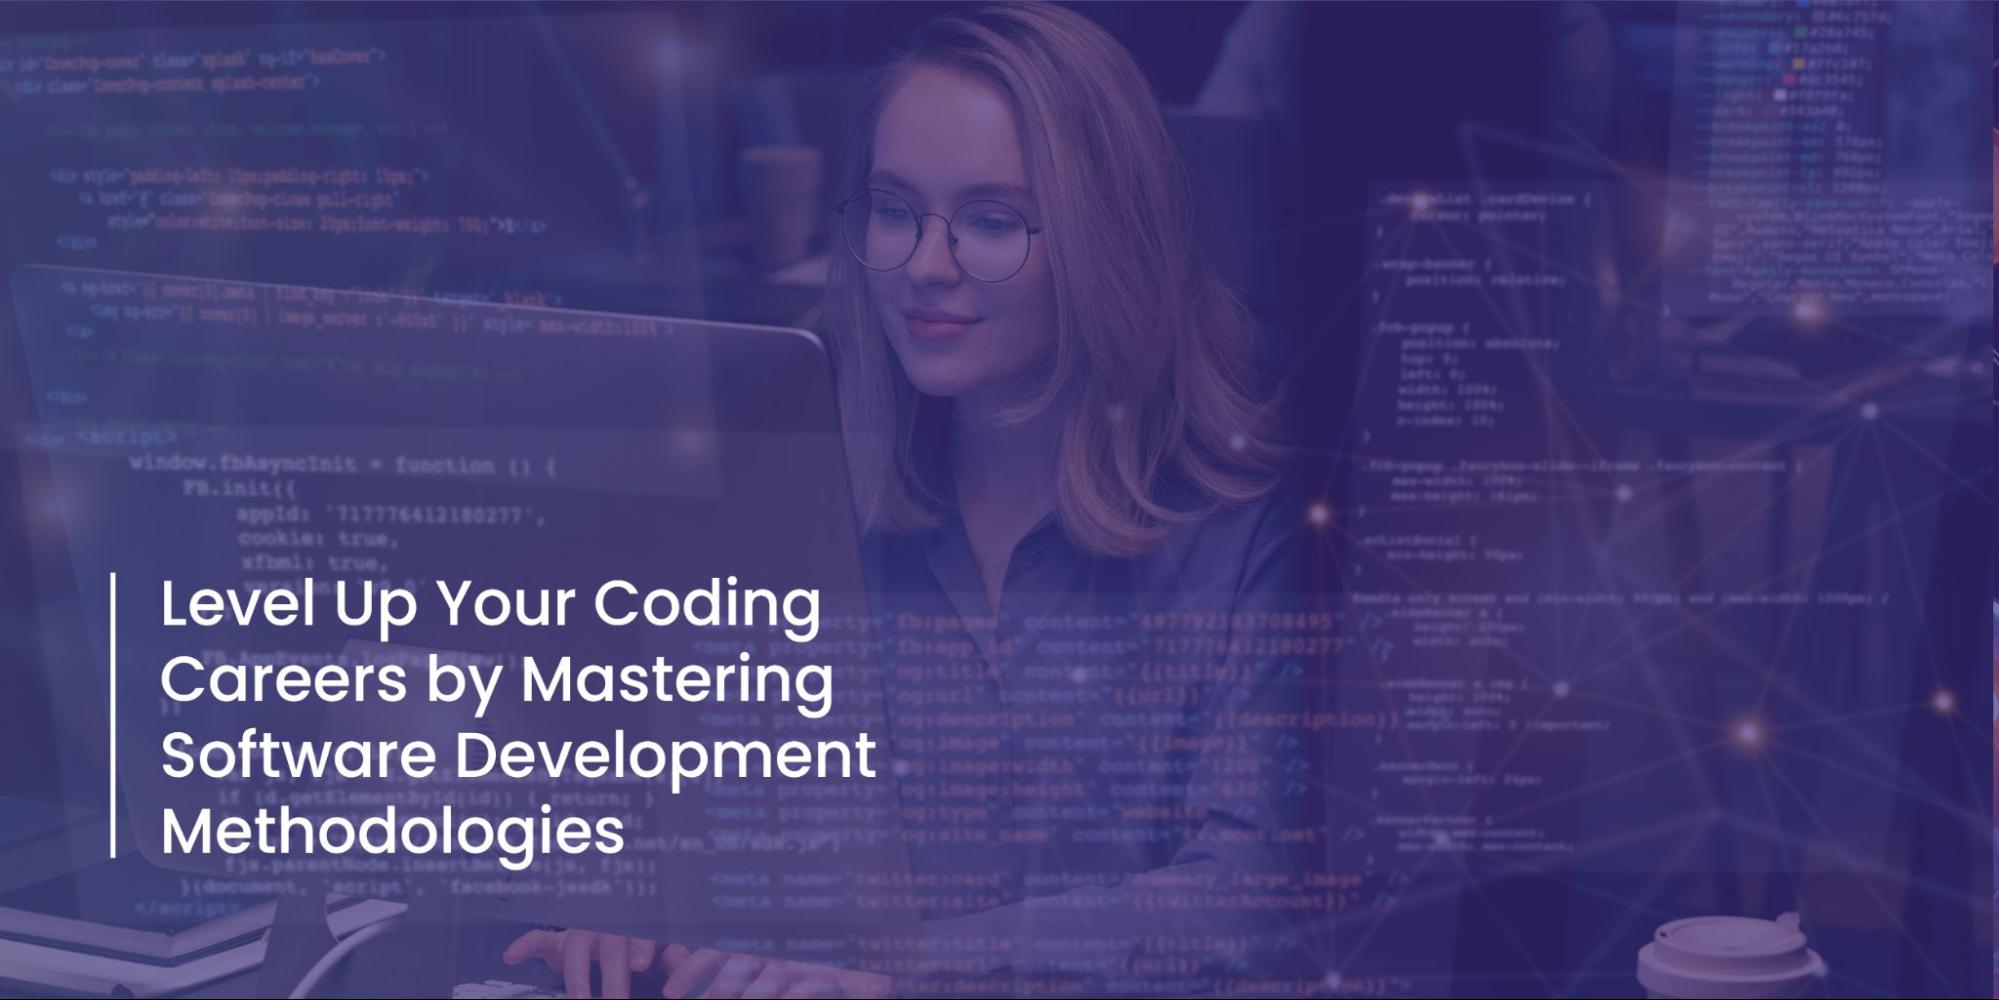 Level Up your coding careers by mastering